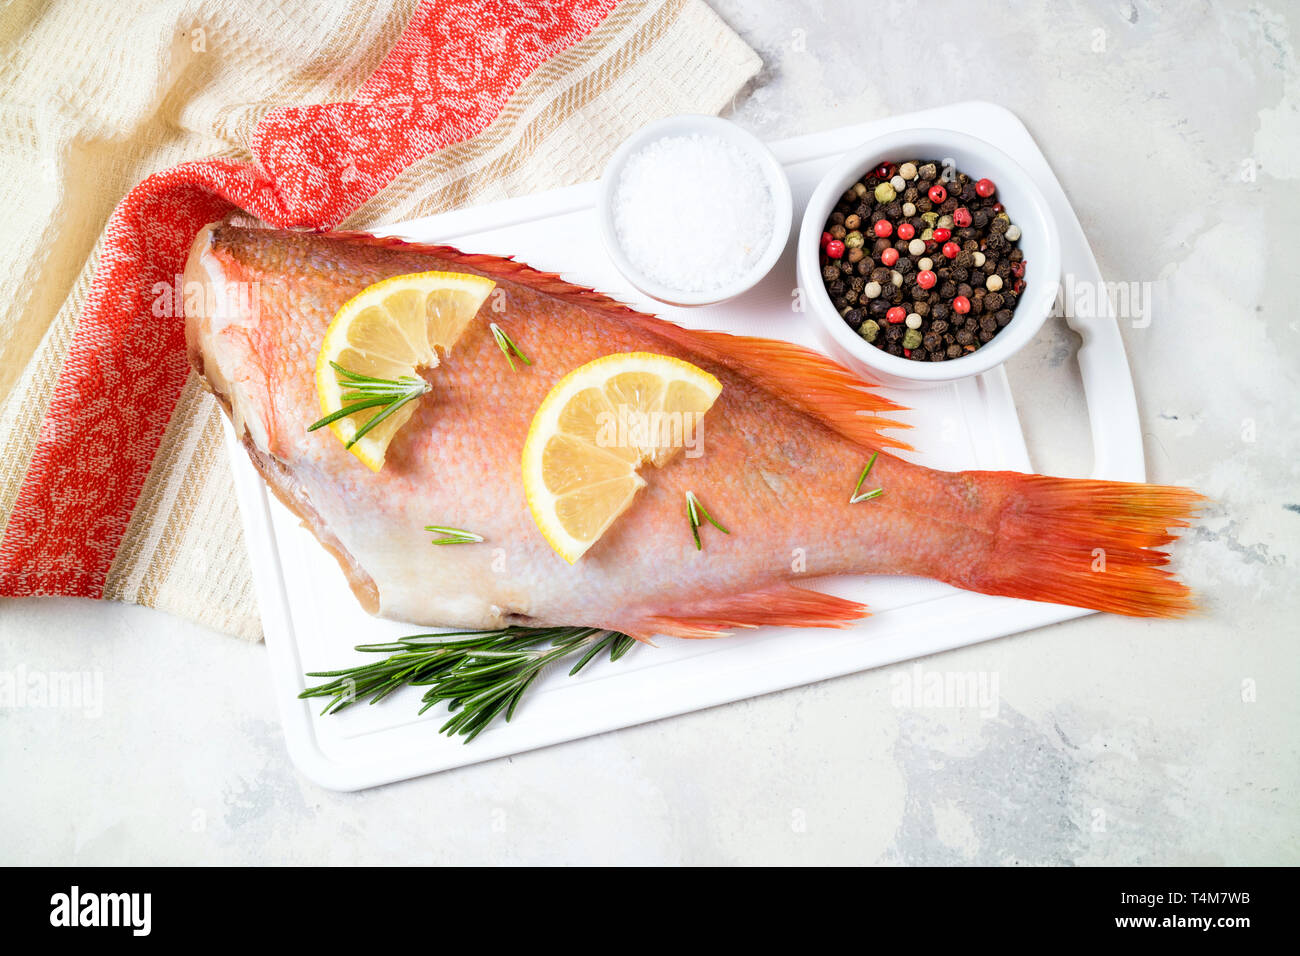 Fish raw snapper with lemon slices, herbs rosemary, salt and pepper on white background. Healthy food and dieting concept. Ingredients for cooking fis Stock Photo